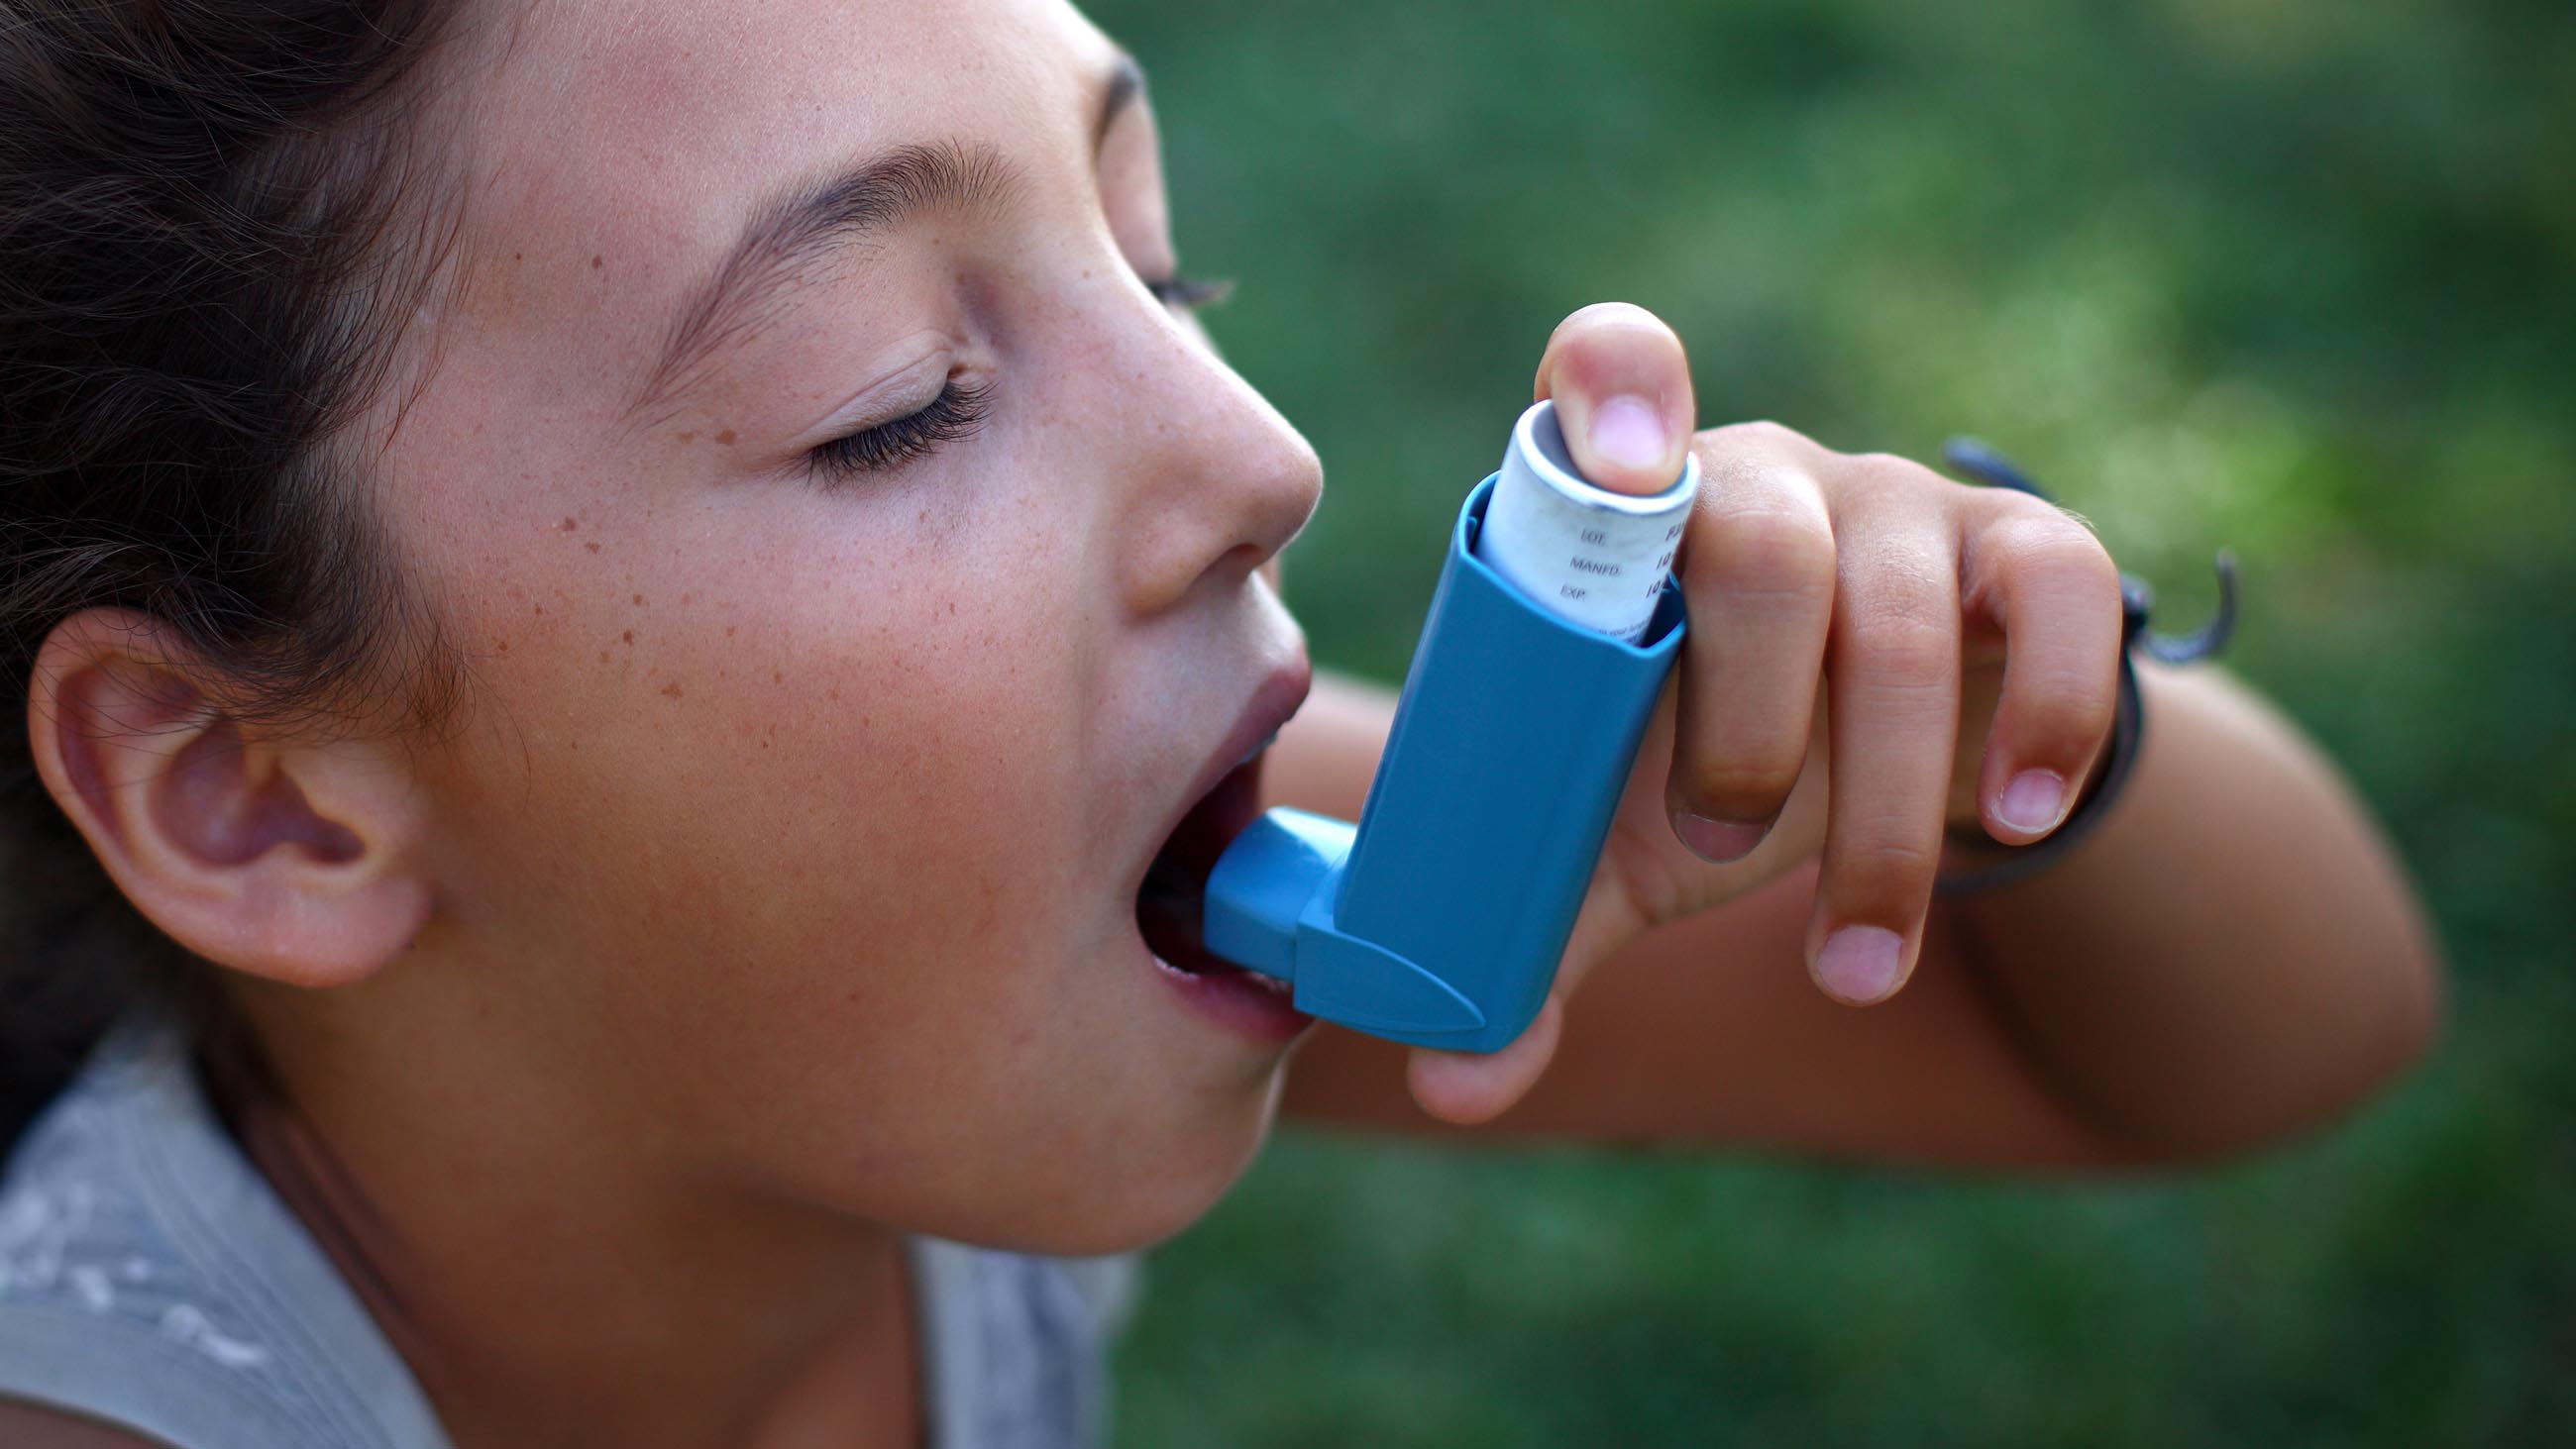 In the U.S., asthma inhalers  can cost three times what they do in Canada — with most of the cost borne by taxpayers and insurers.